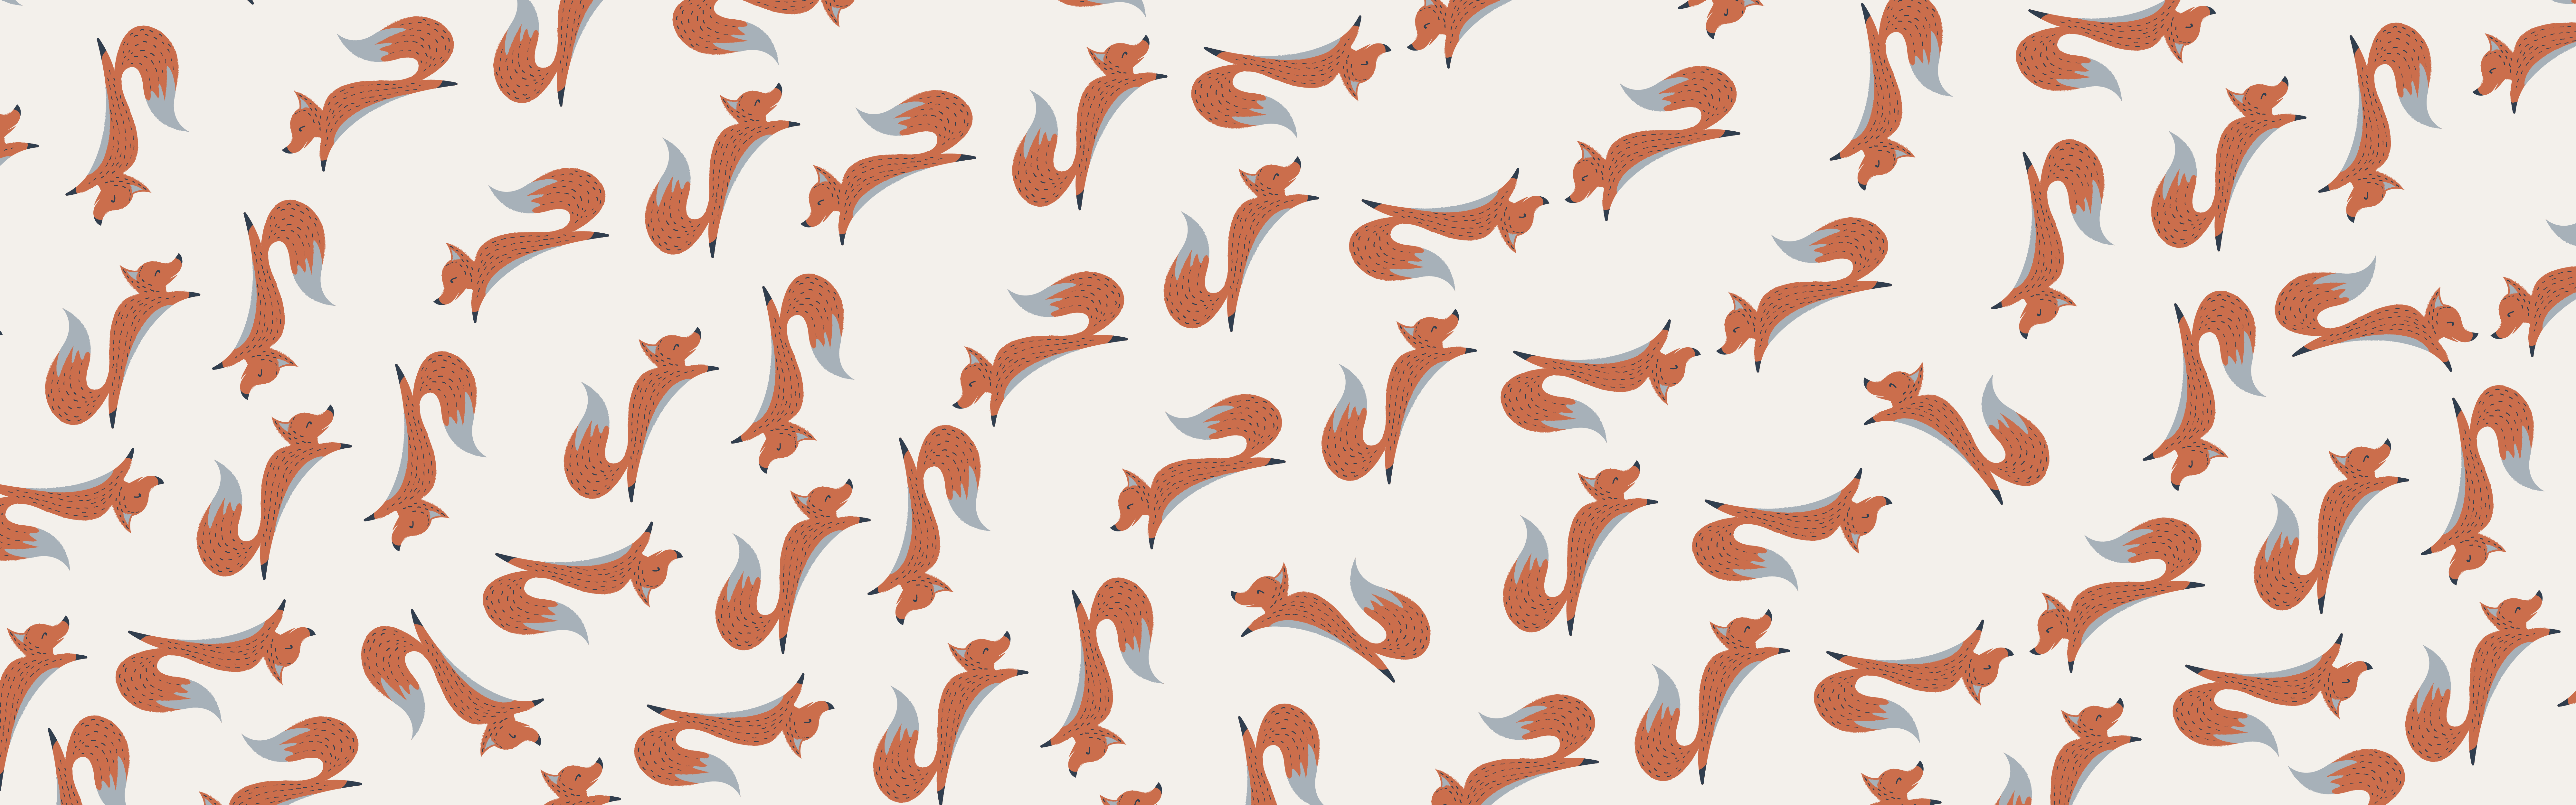 A seamless pattern featuring stylized representations of little foxes in various poses on a white background.